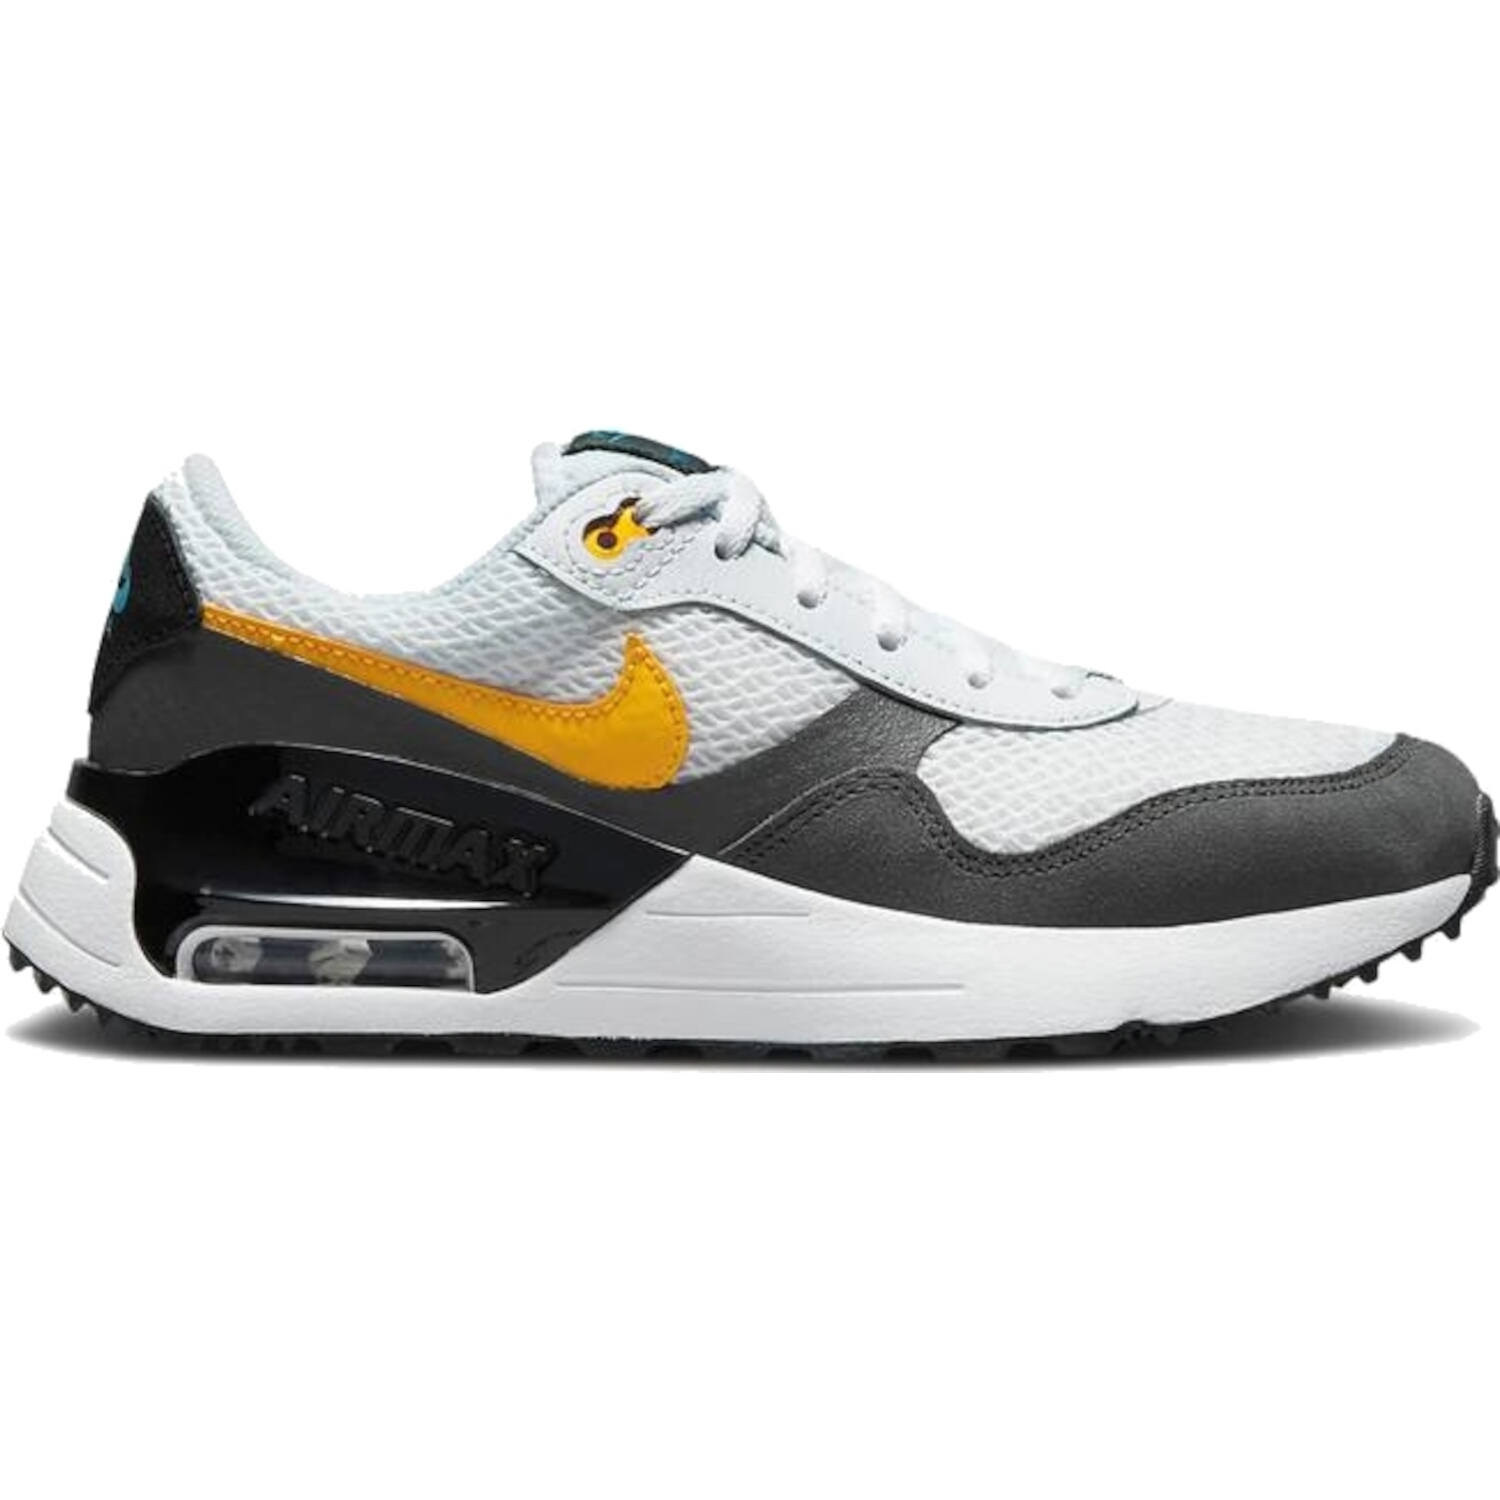 Simuleren Schiereiland pols NIKE AIR MAX SYSTEM KINDER SNEAKERS DQ0284-104 - wbsport.nl